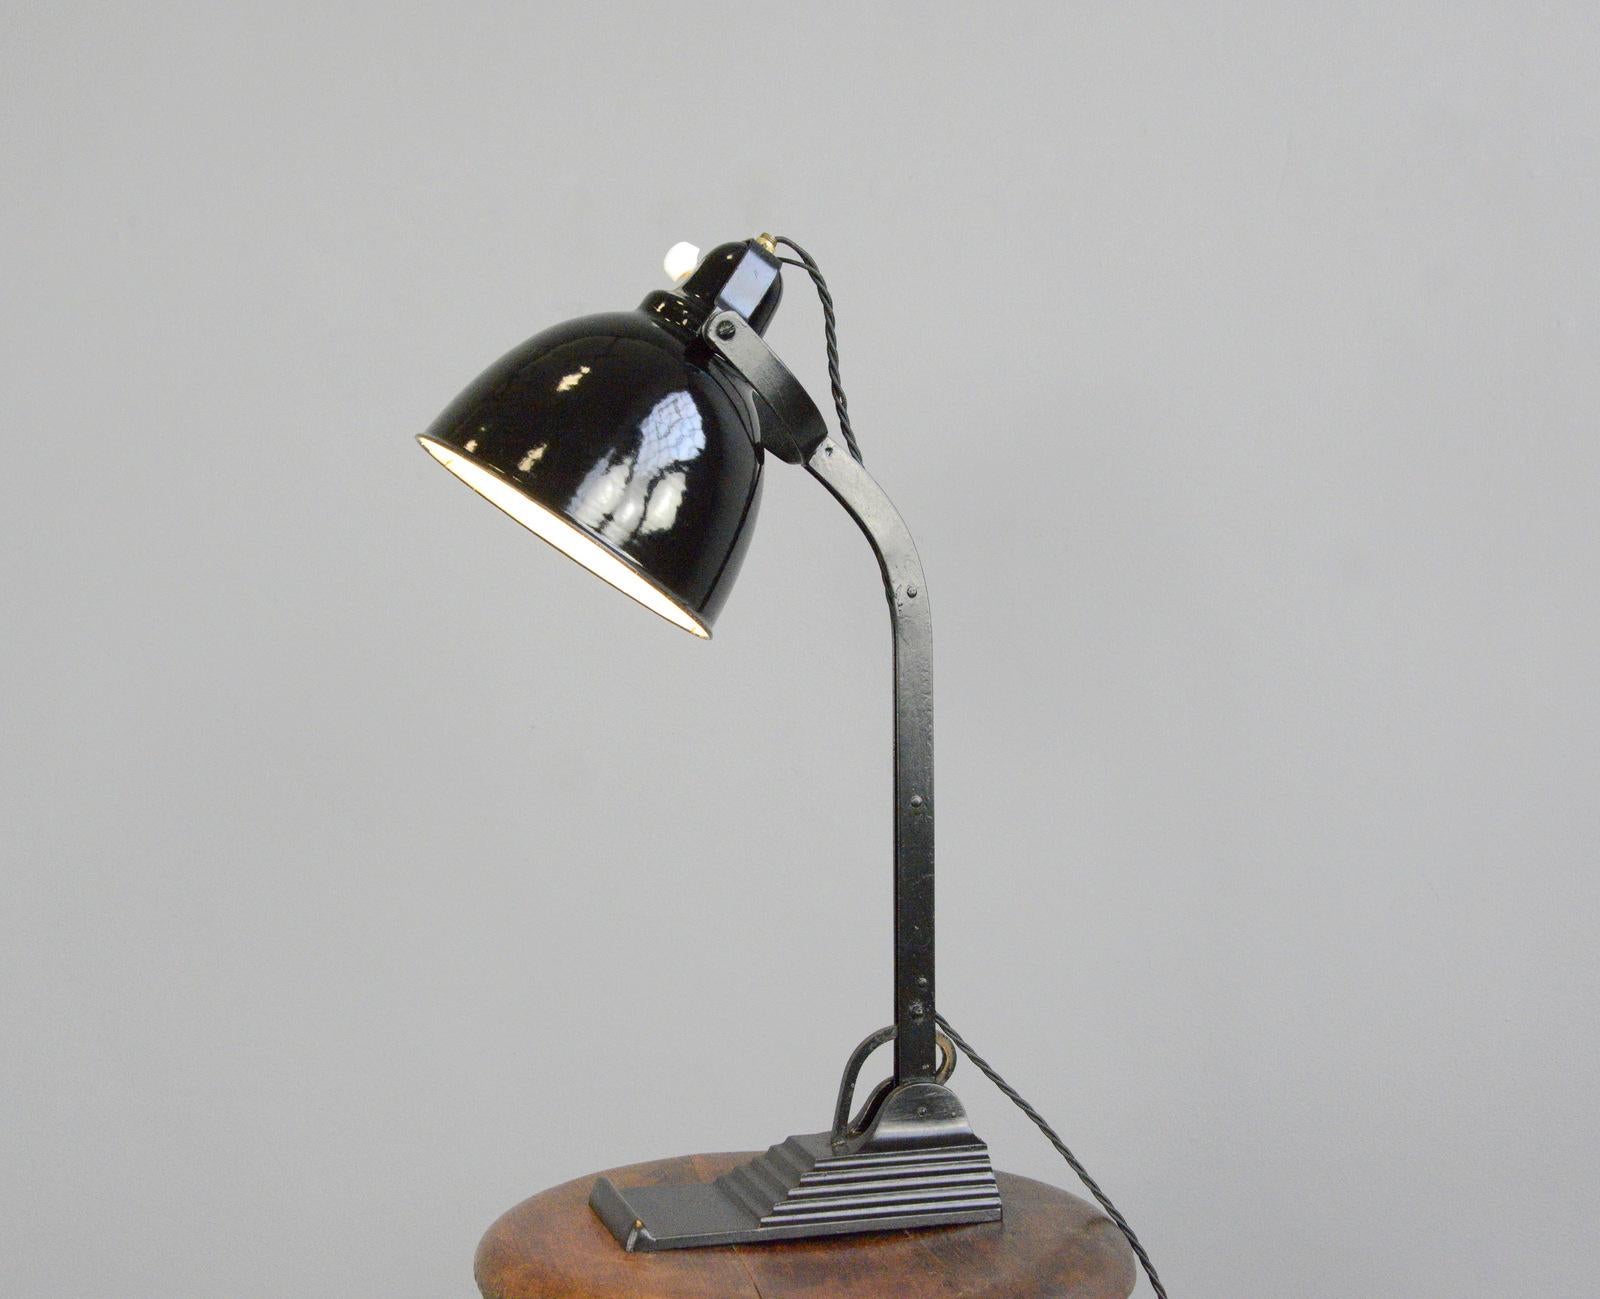 Desk lamp by Horax, circa 1930s

- Vitreous black enamel shade
- Stepped cast iron base
- Adjustable arm and shade
- Original porcelain On/Off switch on the shade
- Produced by Dr. Ing. Schneider & Co, Frankfurt under the brand name 